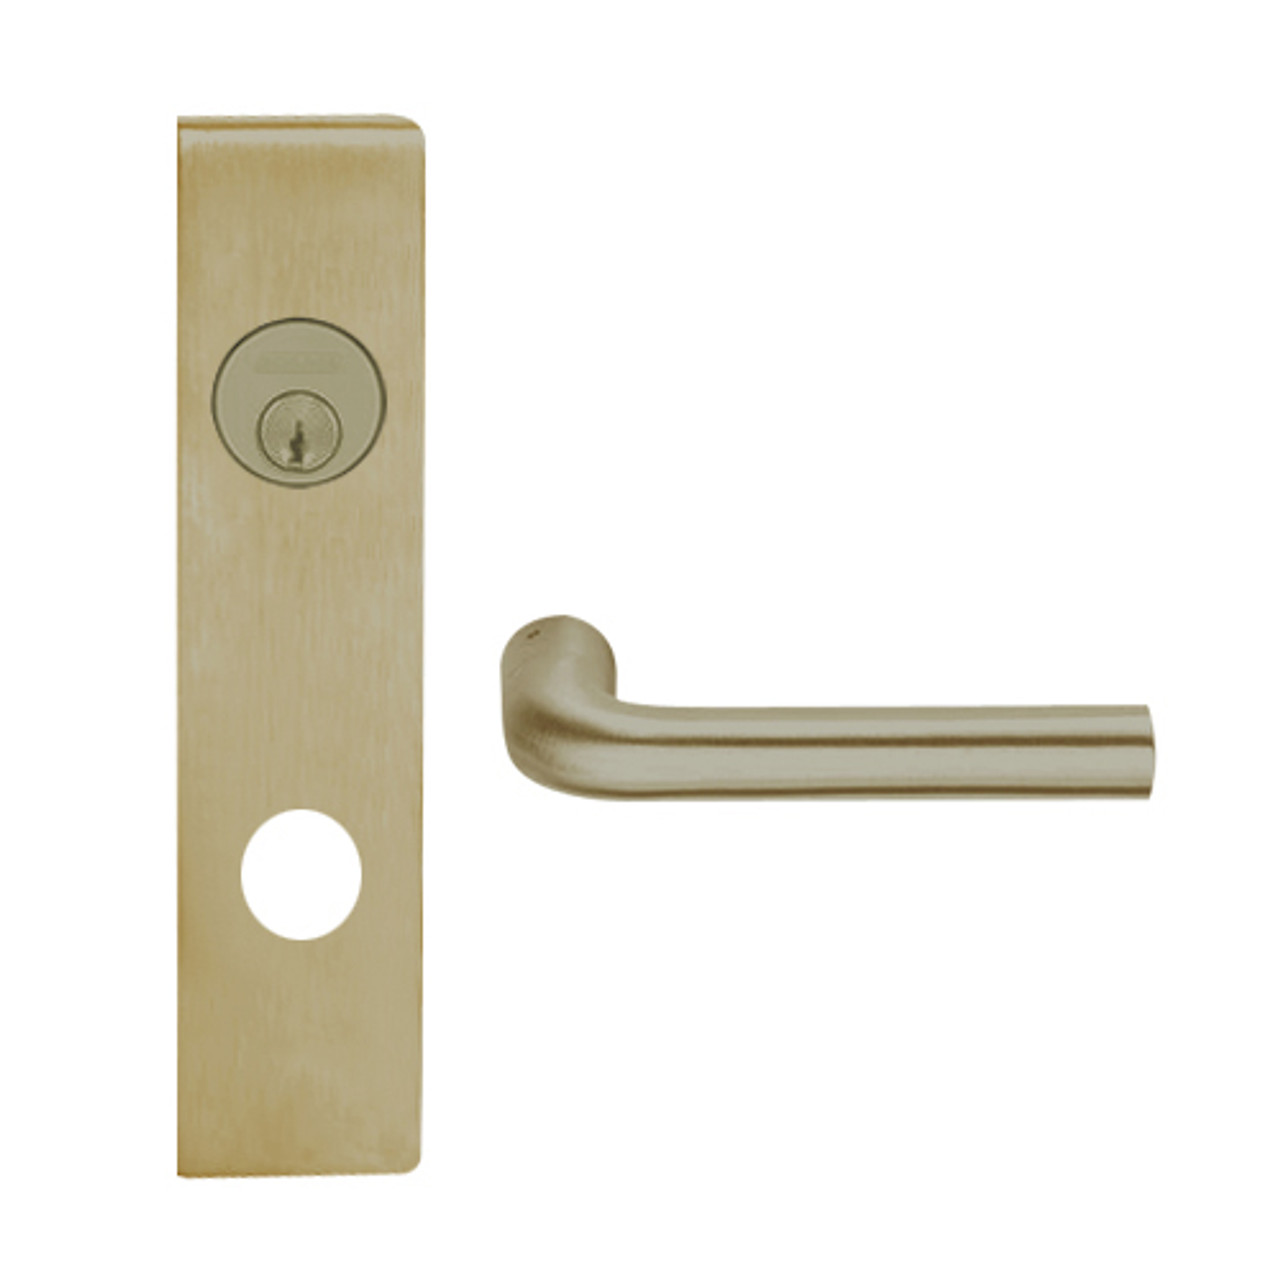 L9026L-02L-613 Schlage L Series Less Cylinder Exit Lock with Cylinder Commercial Mortise Lock with 02 Cast Lever Design in Oil Rubbed Bronze